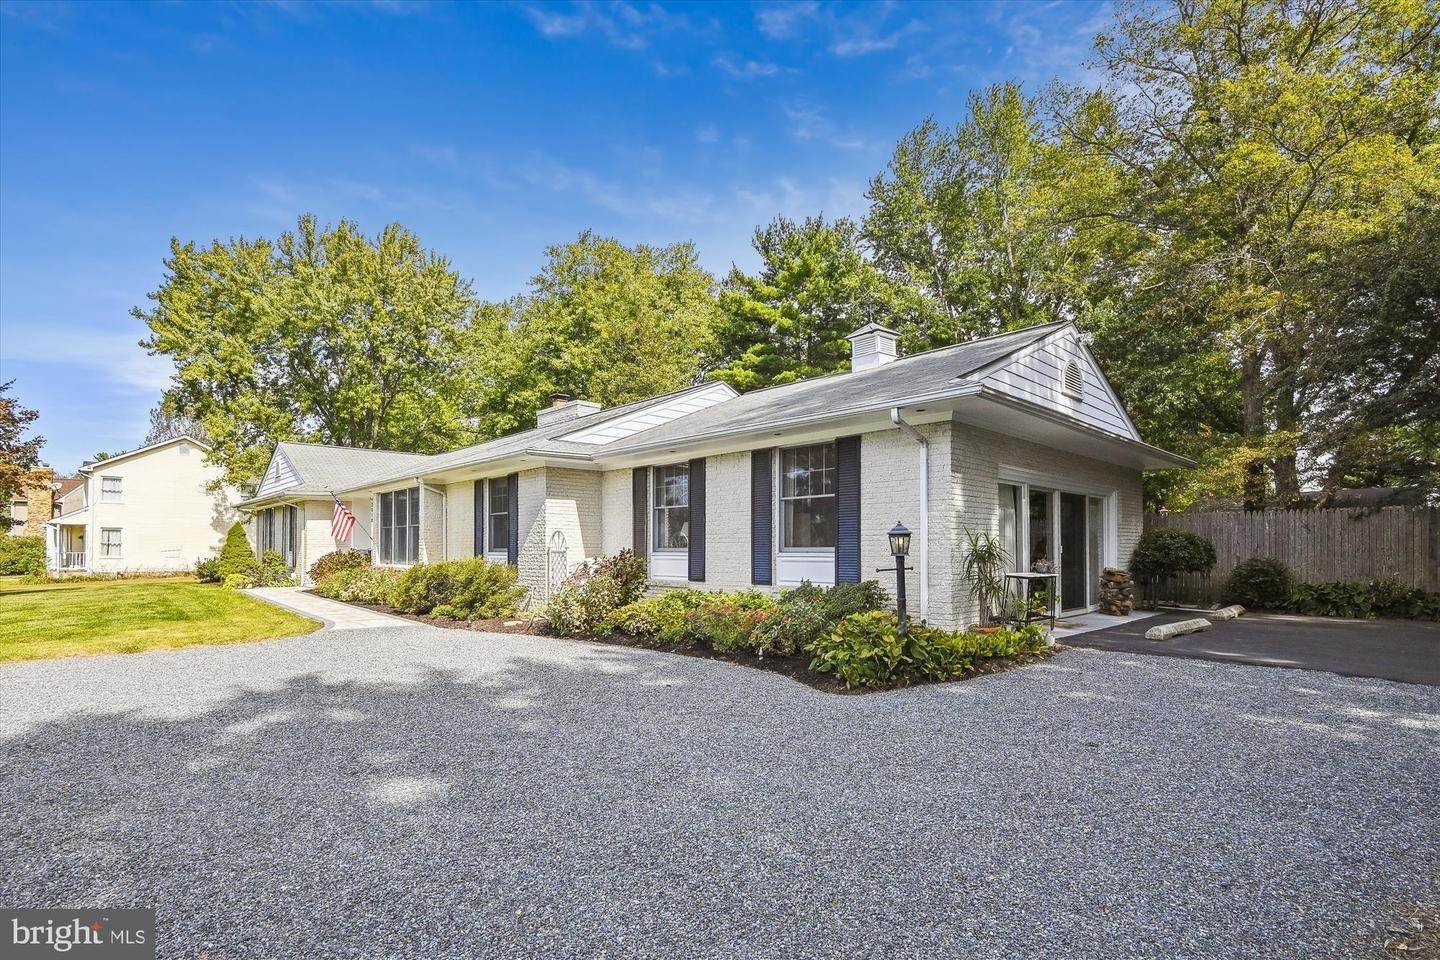 14. Single Family for Sale at Chester, MD 21619